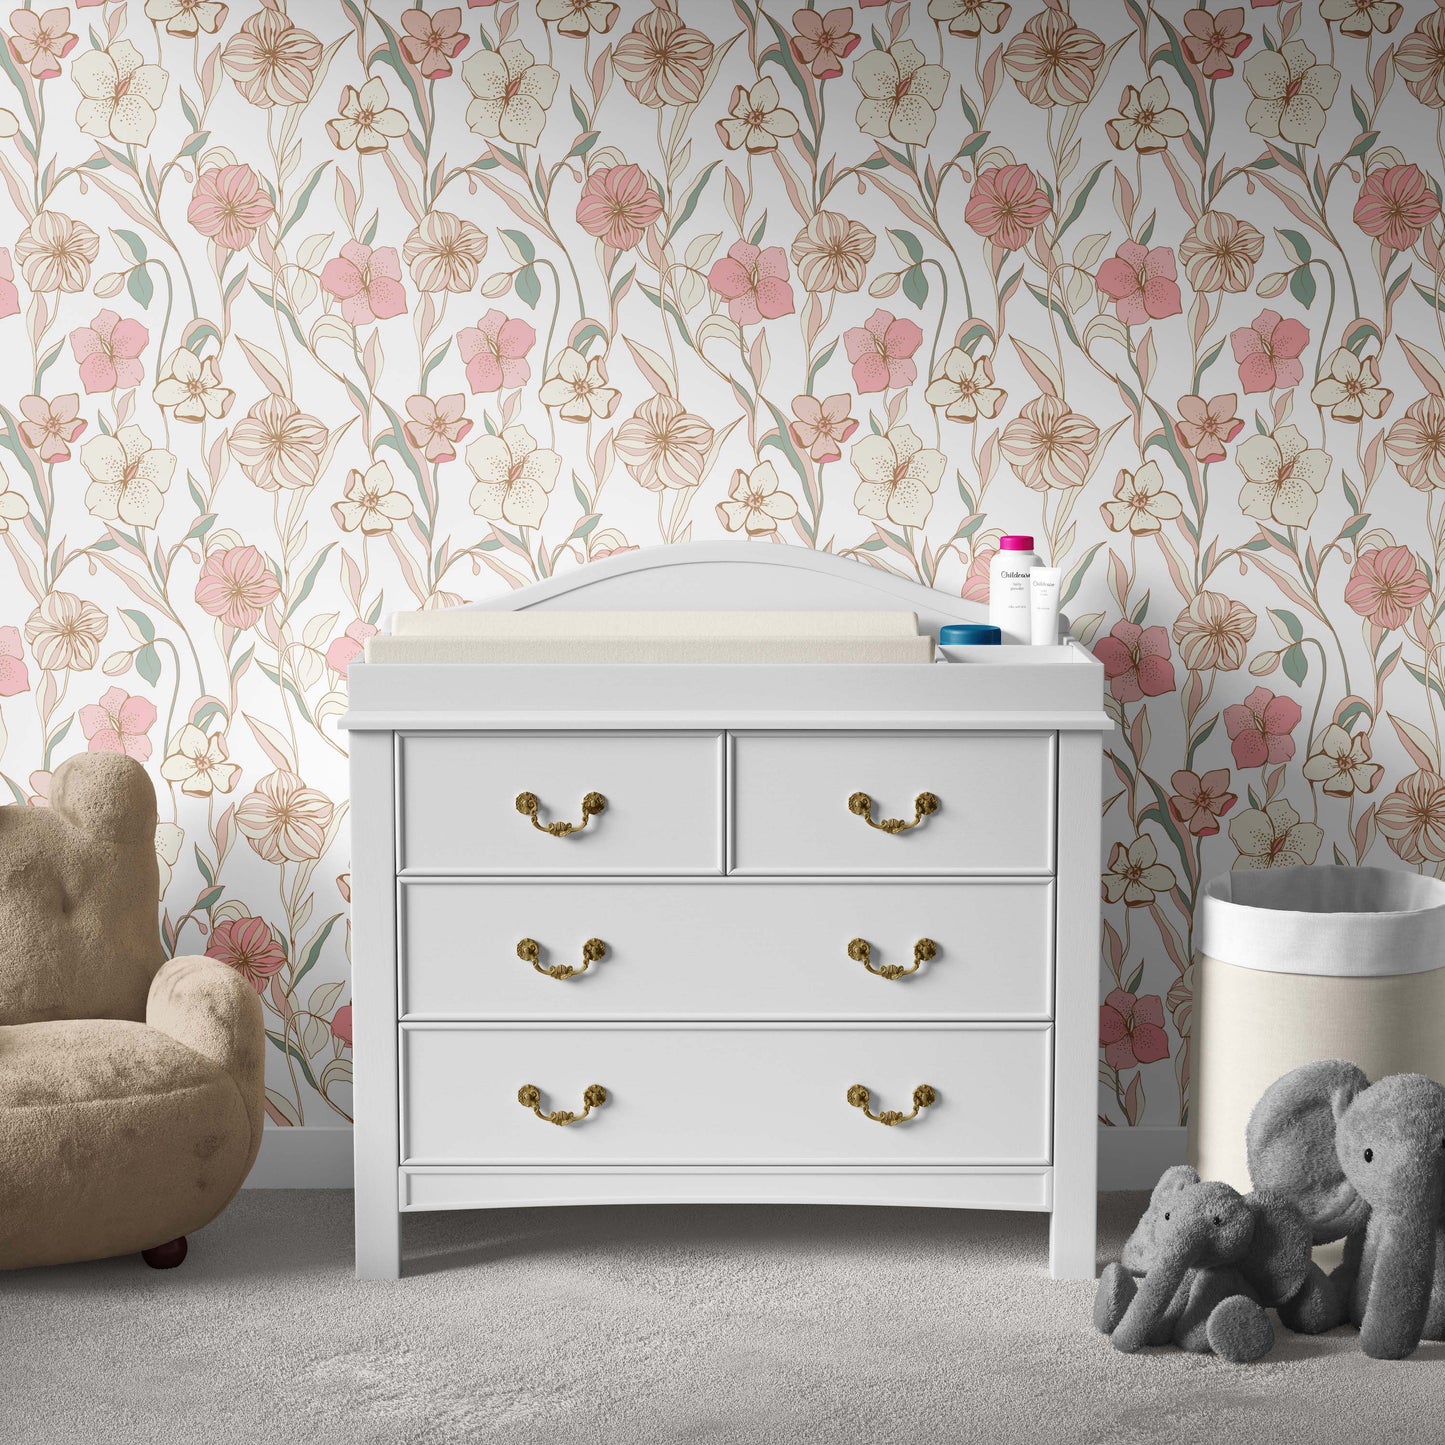 Flower Chateau | Peel and Stick | Fabric Wallpaper